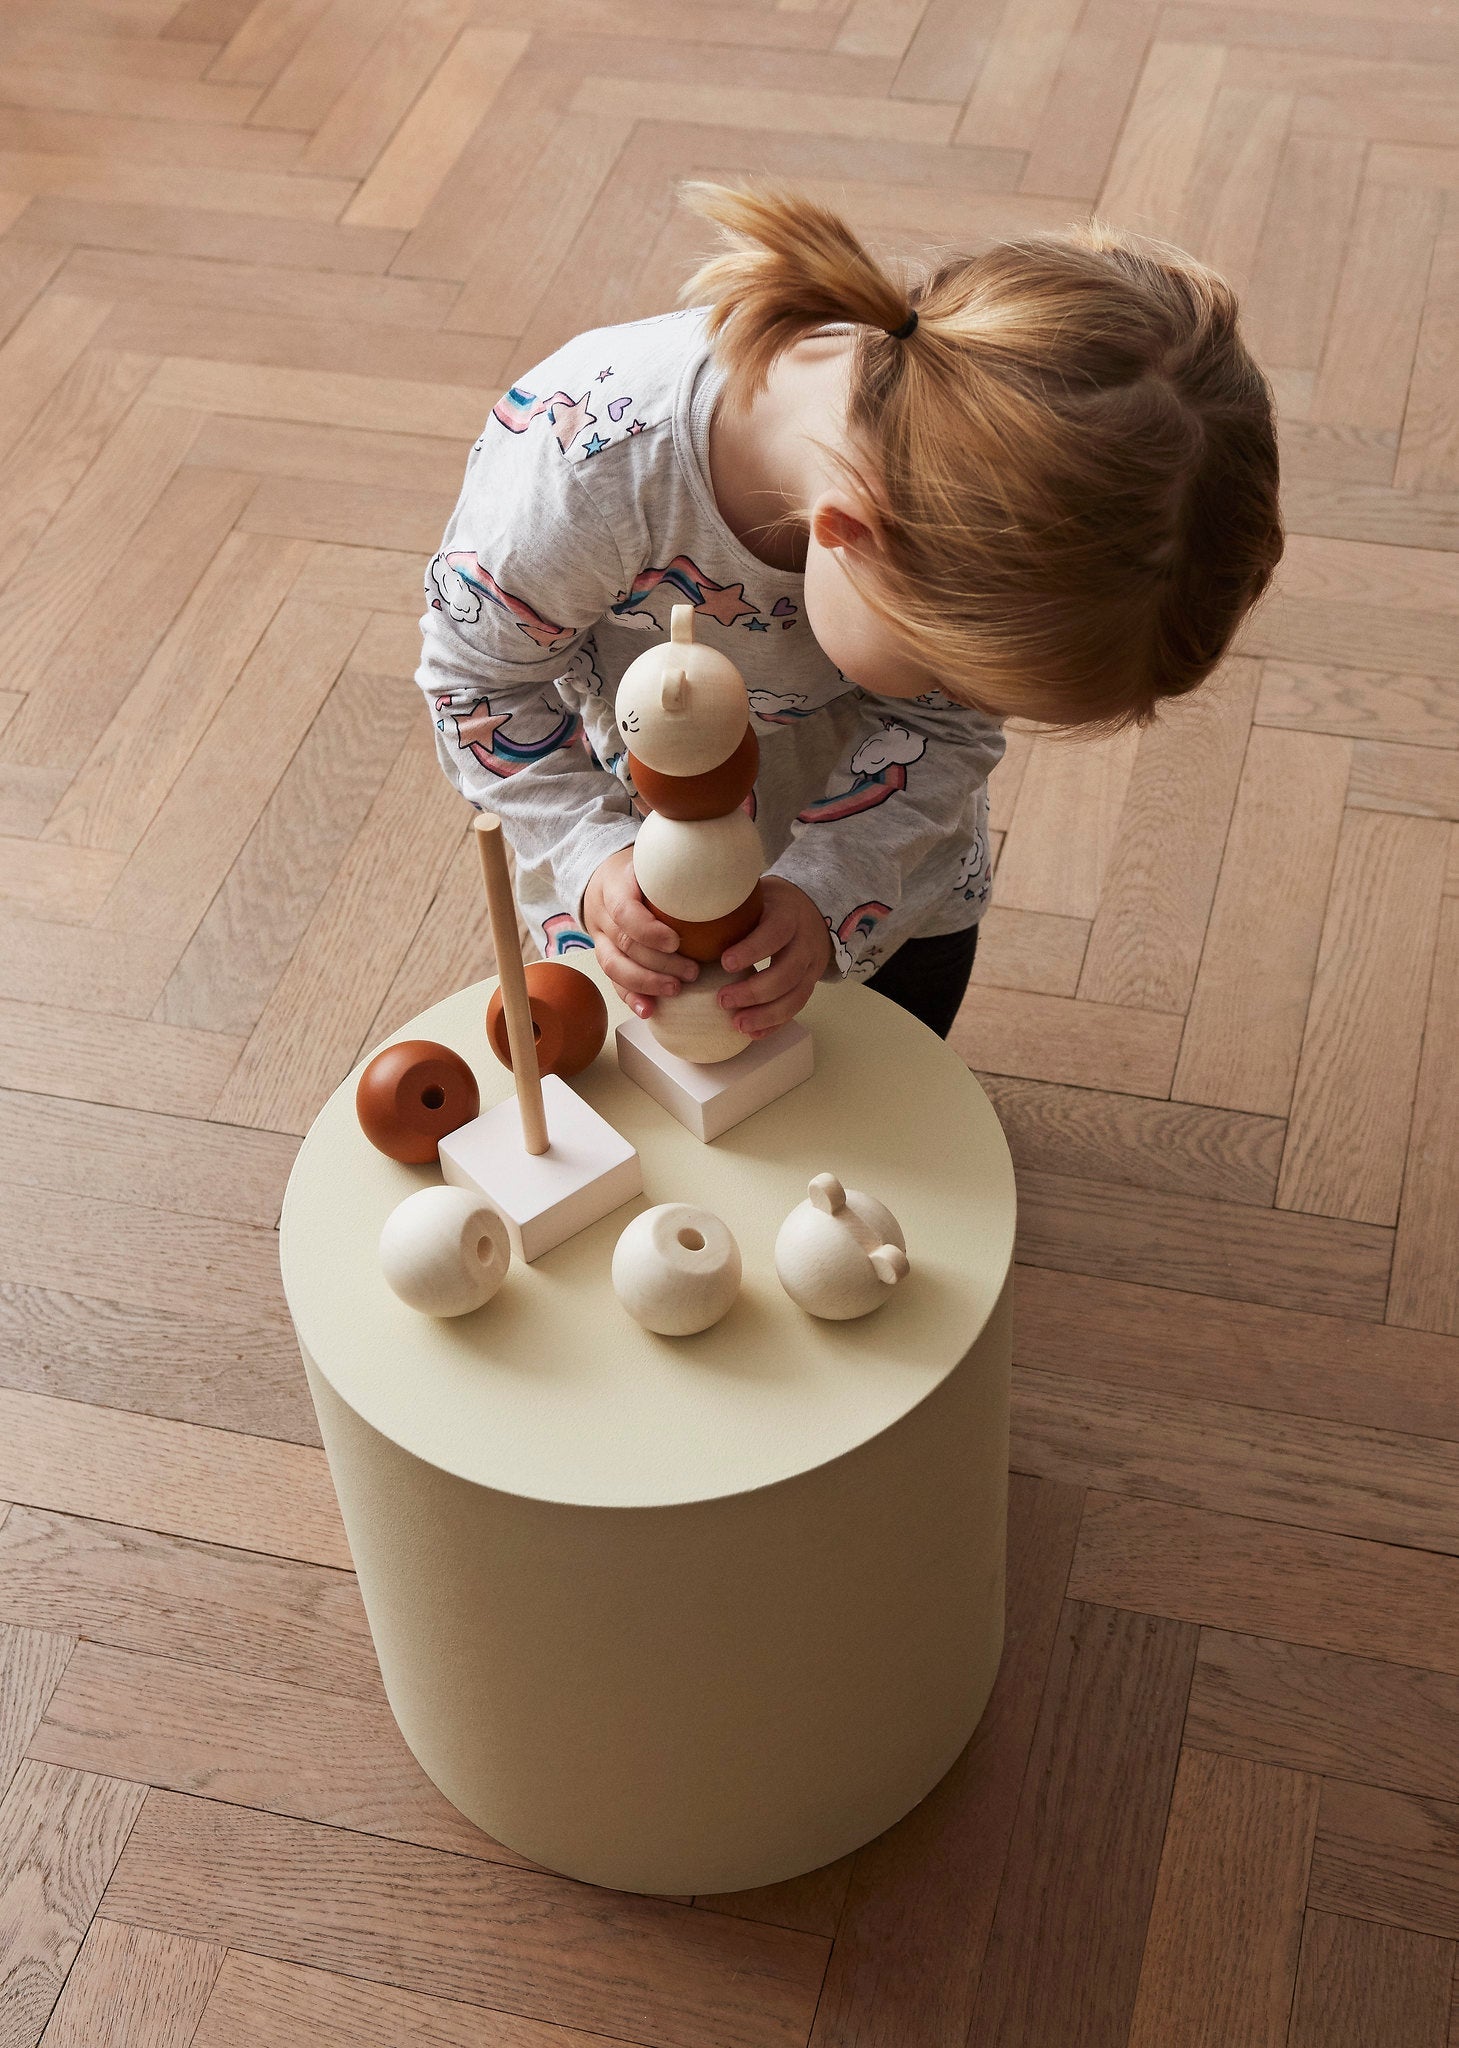 Wooden Stacking Lala - Nature Wooden Toy OYOY 